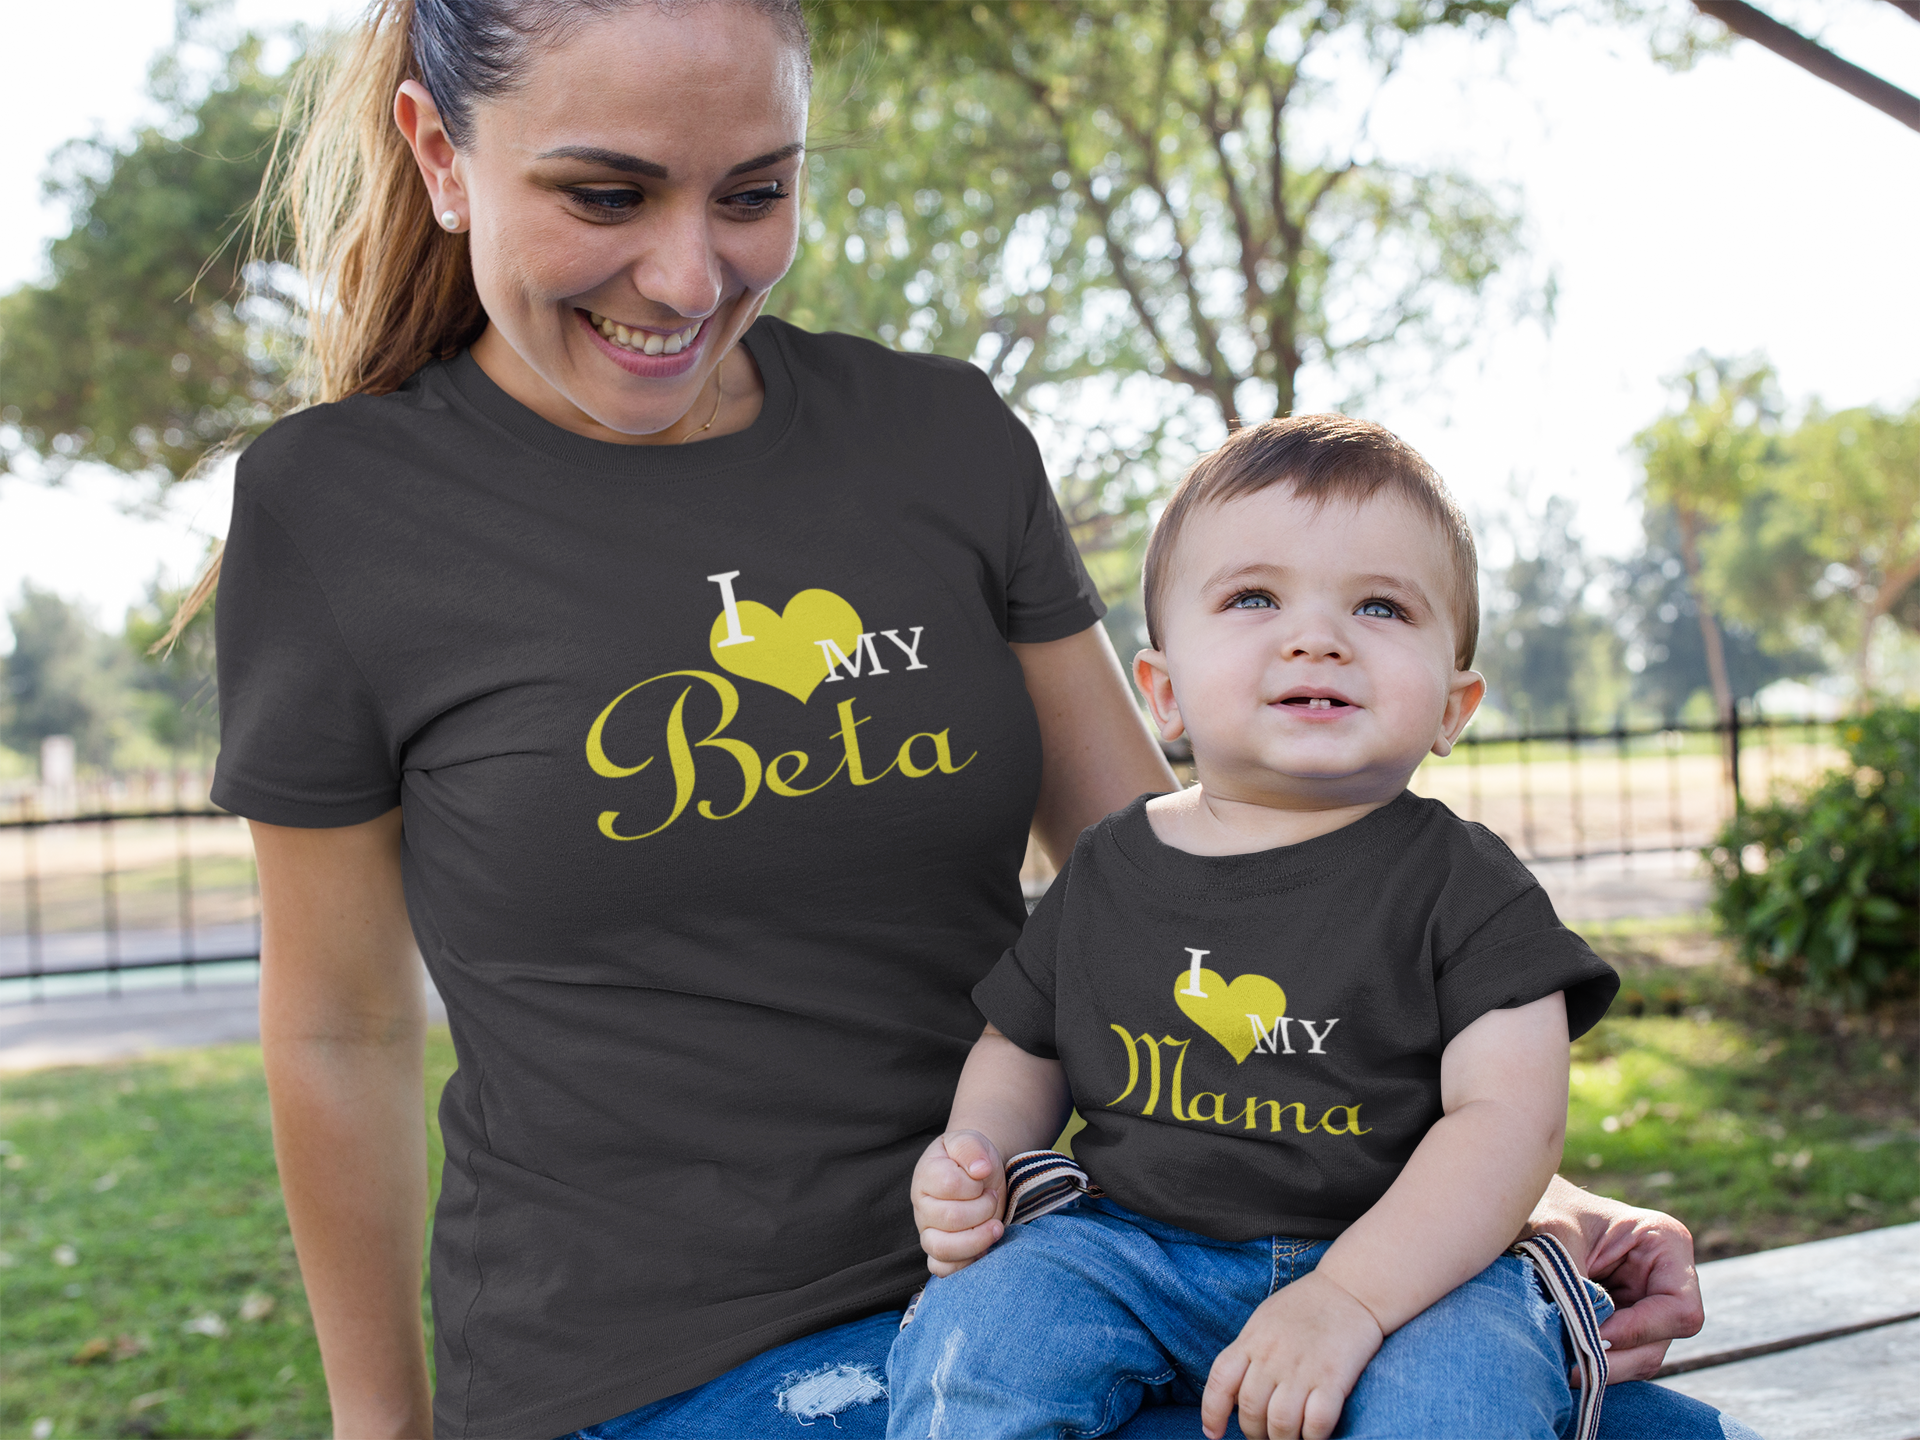 I Love My Beta Mother And Son Black Matching T-Shirt- FunkyTradition